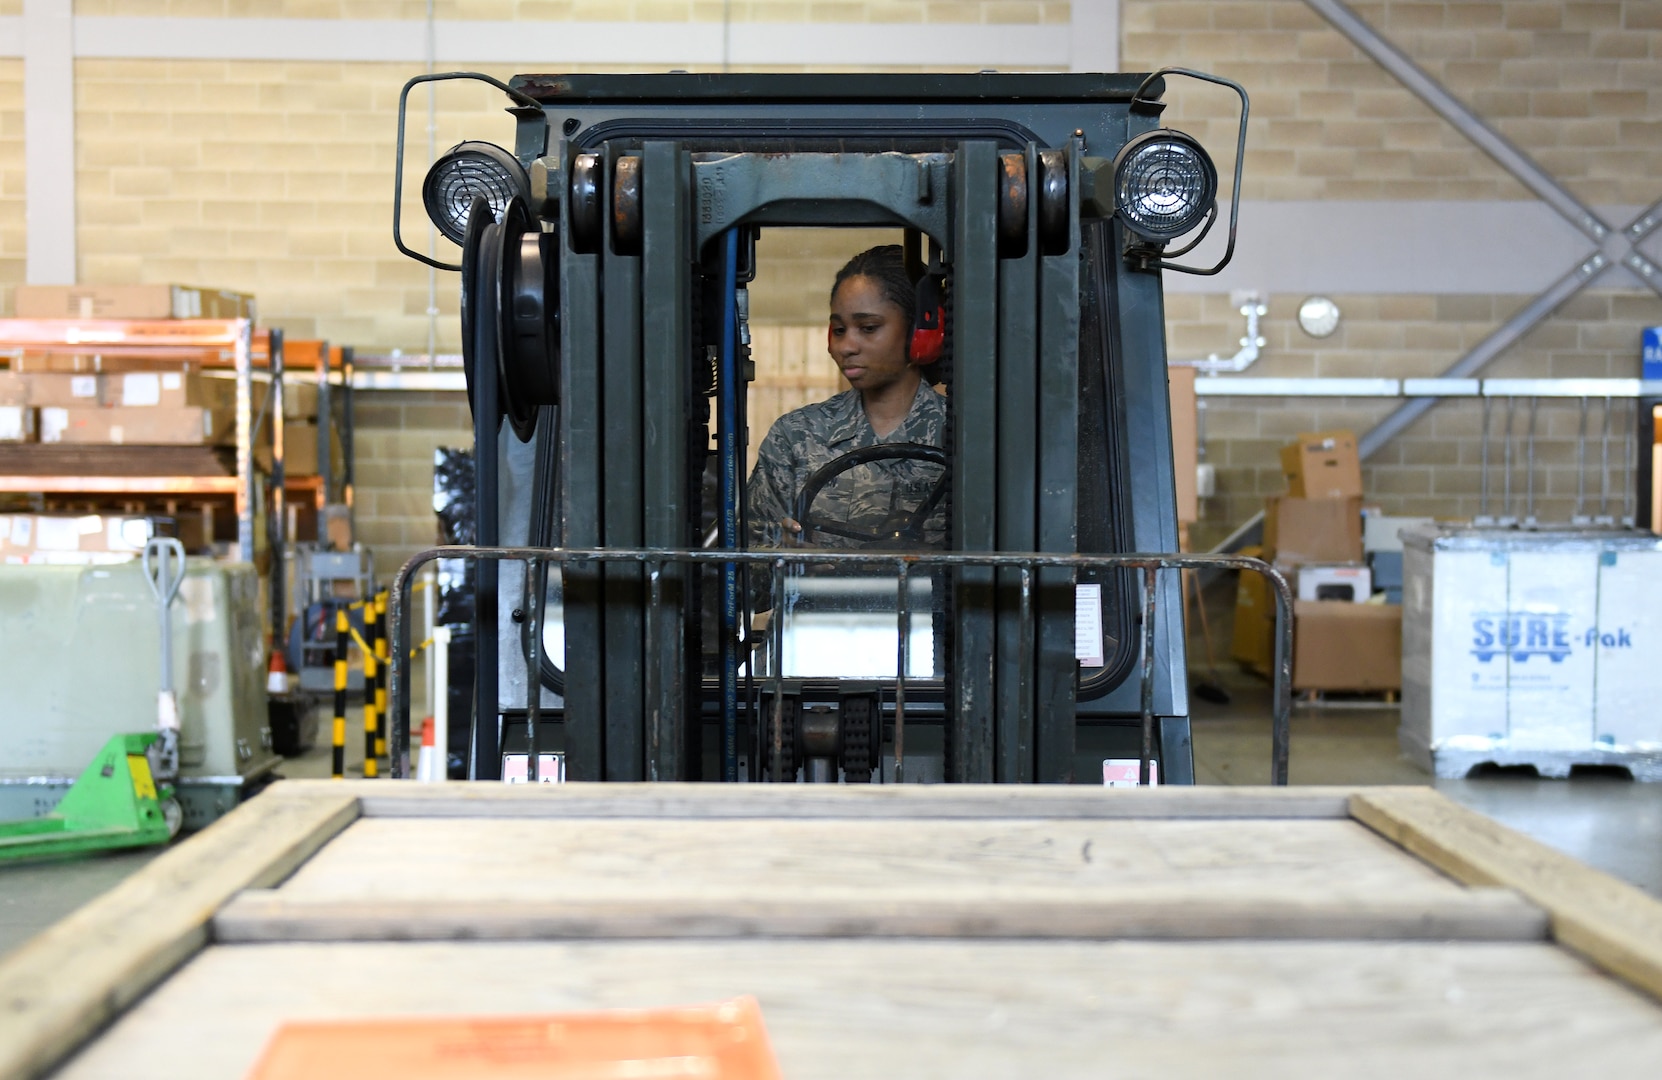 A 48th Deployment and Distribution Flight Airman operates a fork lift at Royal Air Force Lakenheath, England, April 15, 2019.  The flight provides Airmen with all necessary equipment to expediently deploy forward ready ensuring they can execute their mission. (U.S. Air Force photo by Staff Sgt. Alex Echols)